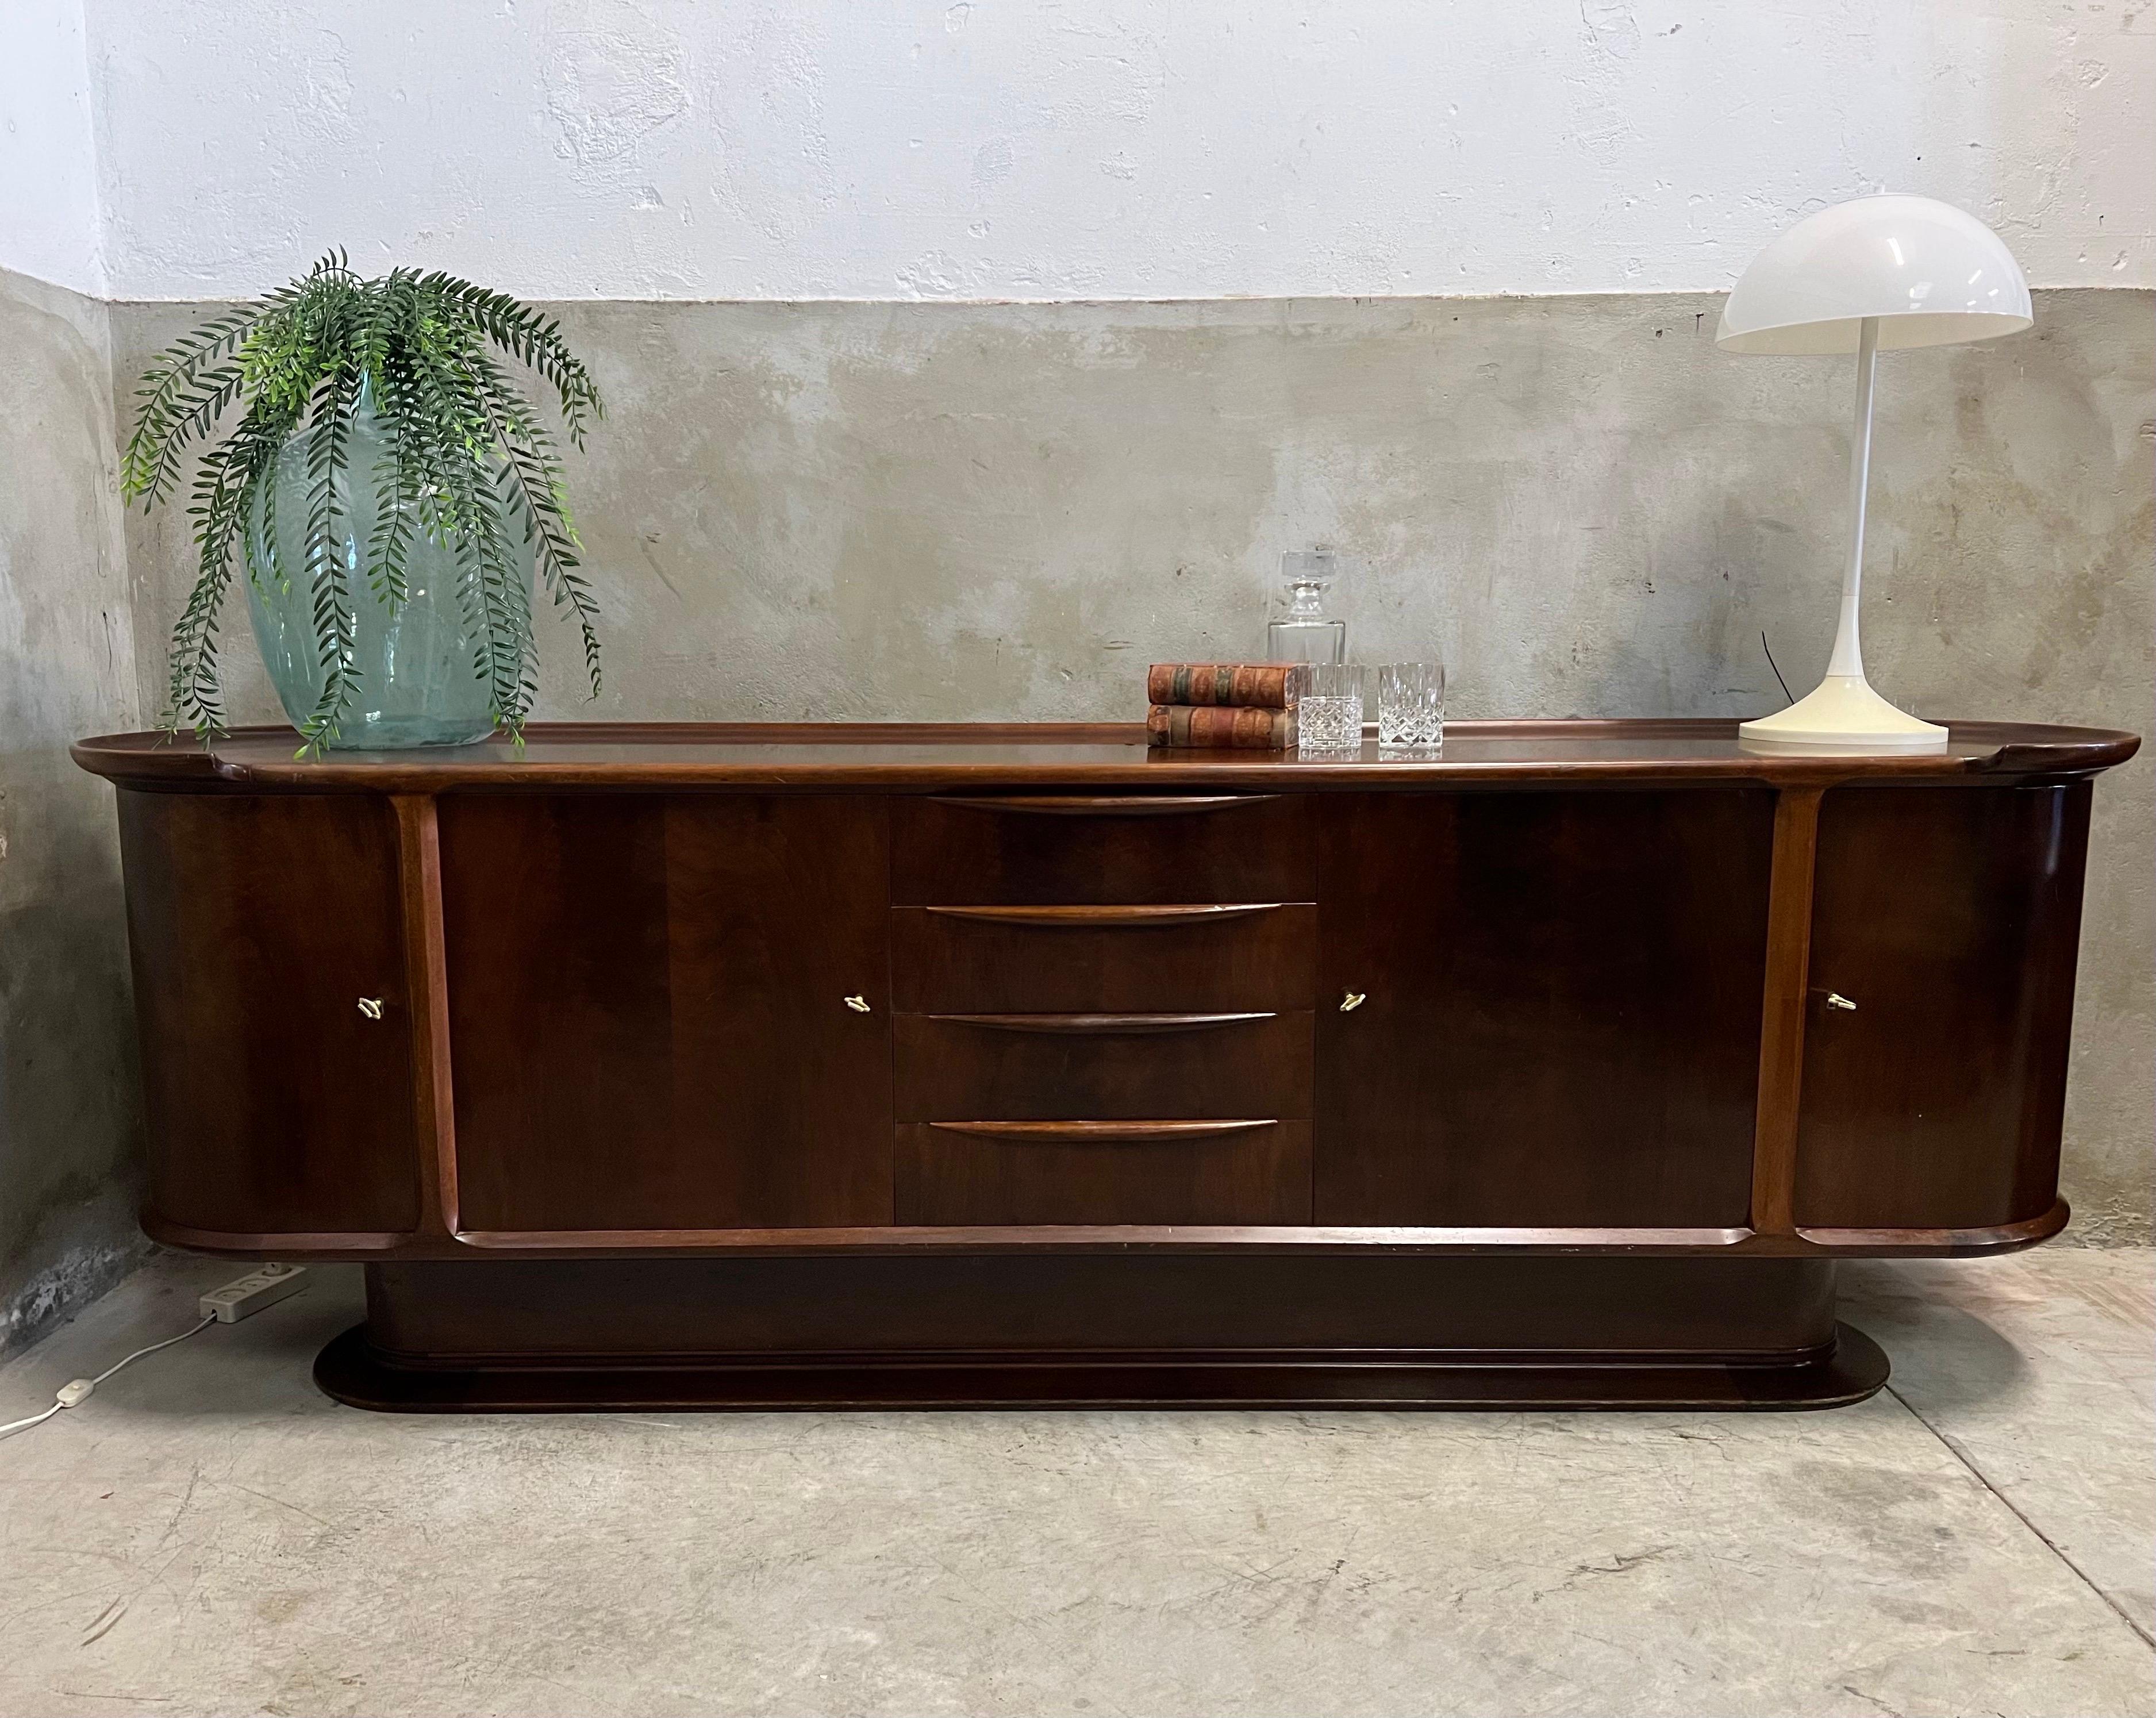 Top quality AA Patijn sideboard from the 1950s for Zijlstra. Already 70 years on this globe but still in a very nice condition. Minor signs of use, of course, but really nothing disturbing.

This AA Patijn sideboard has curved doors, left and